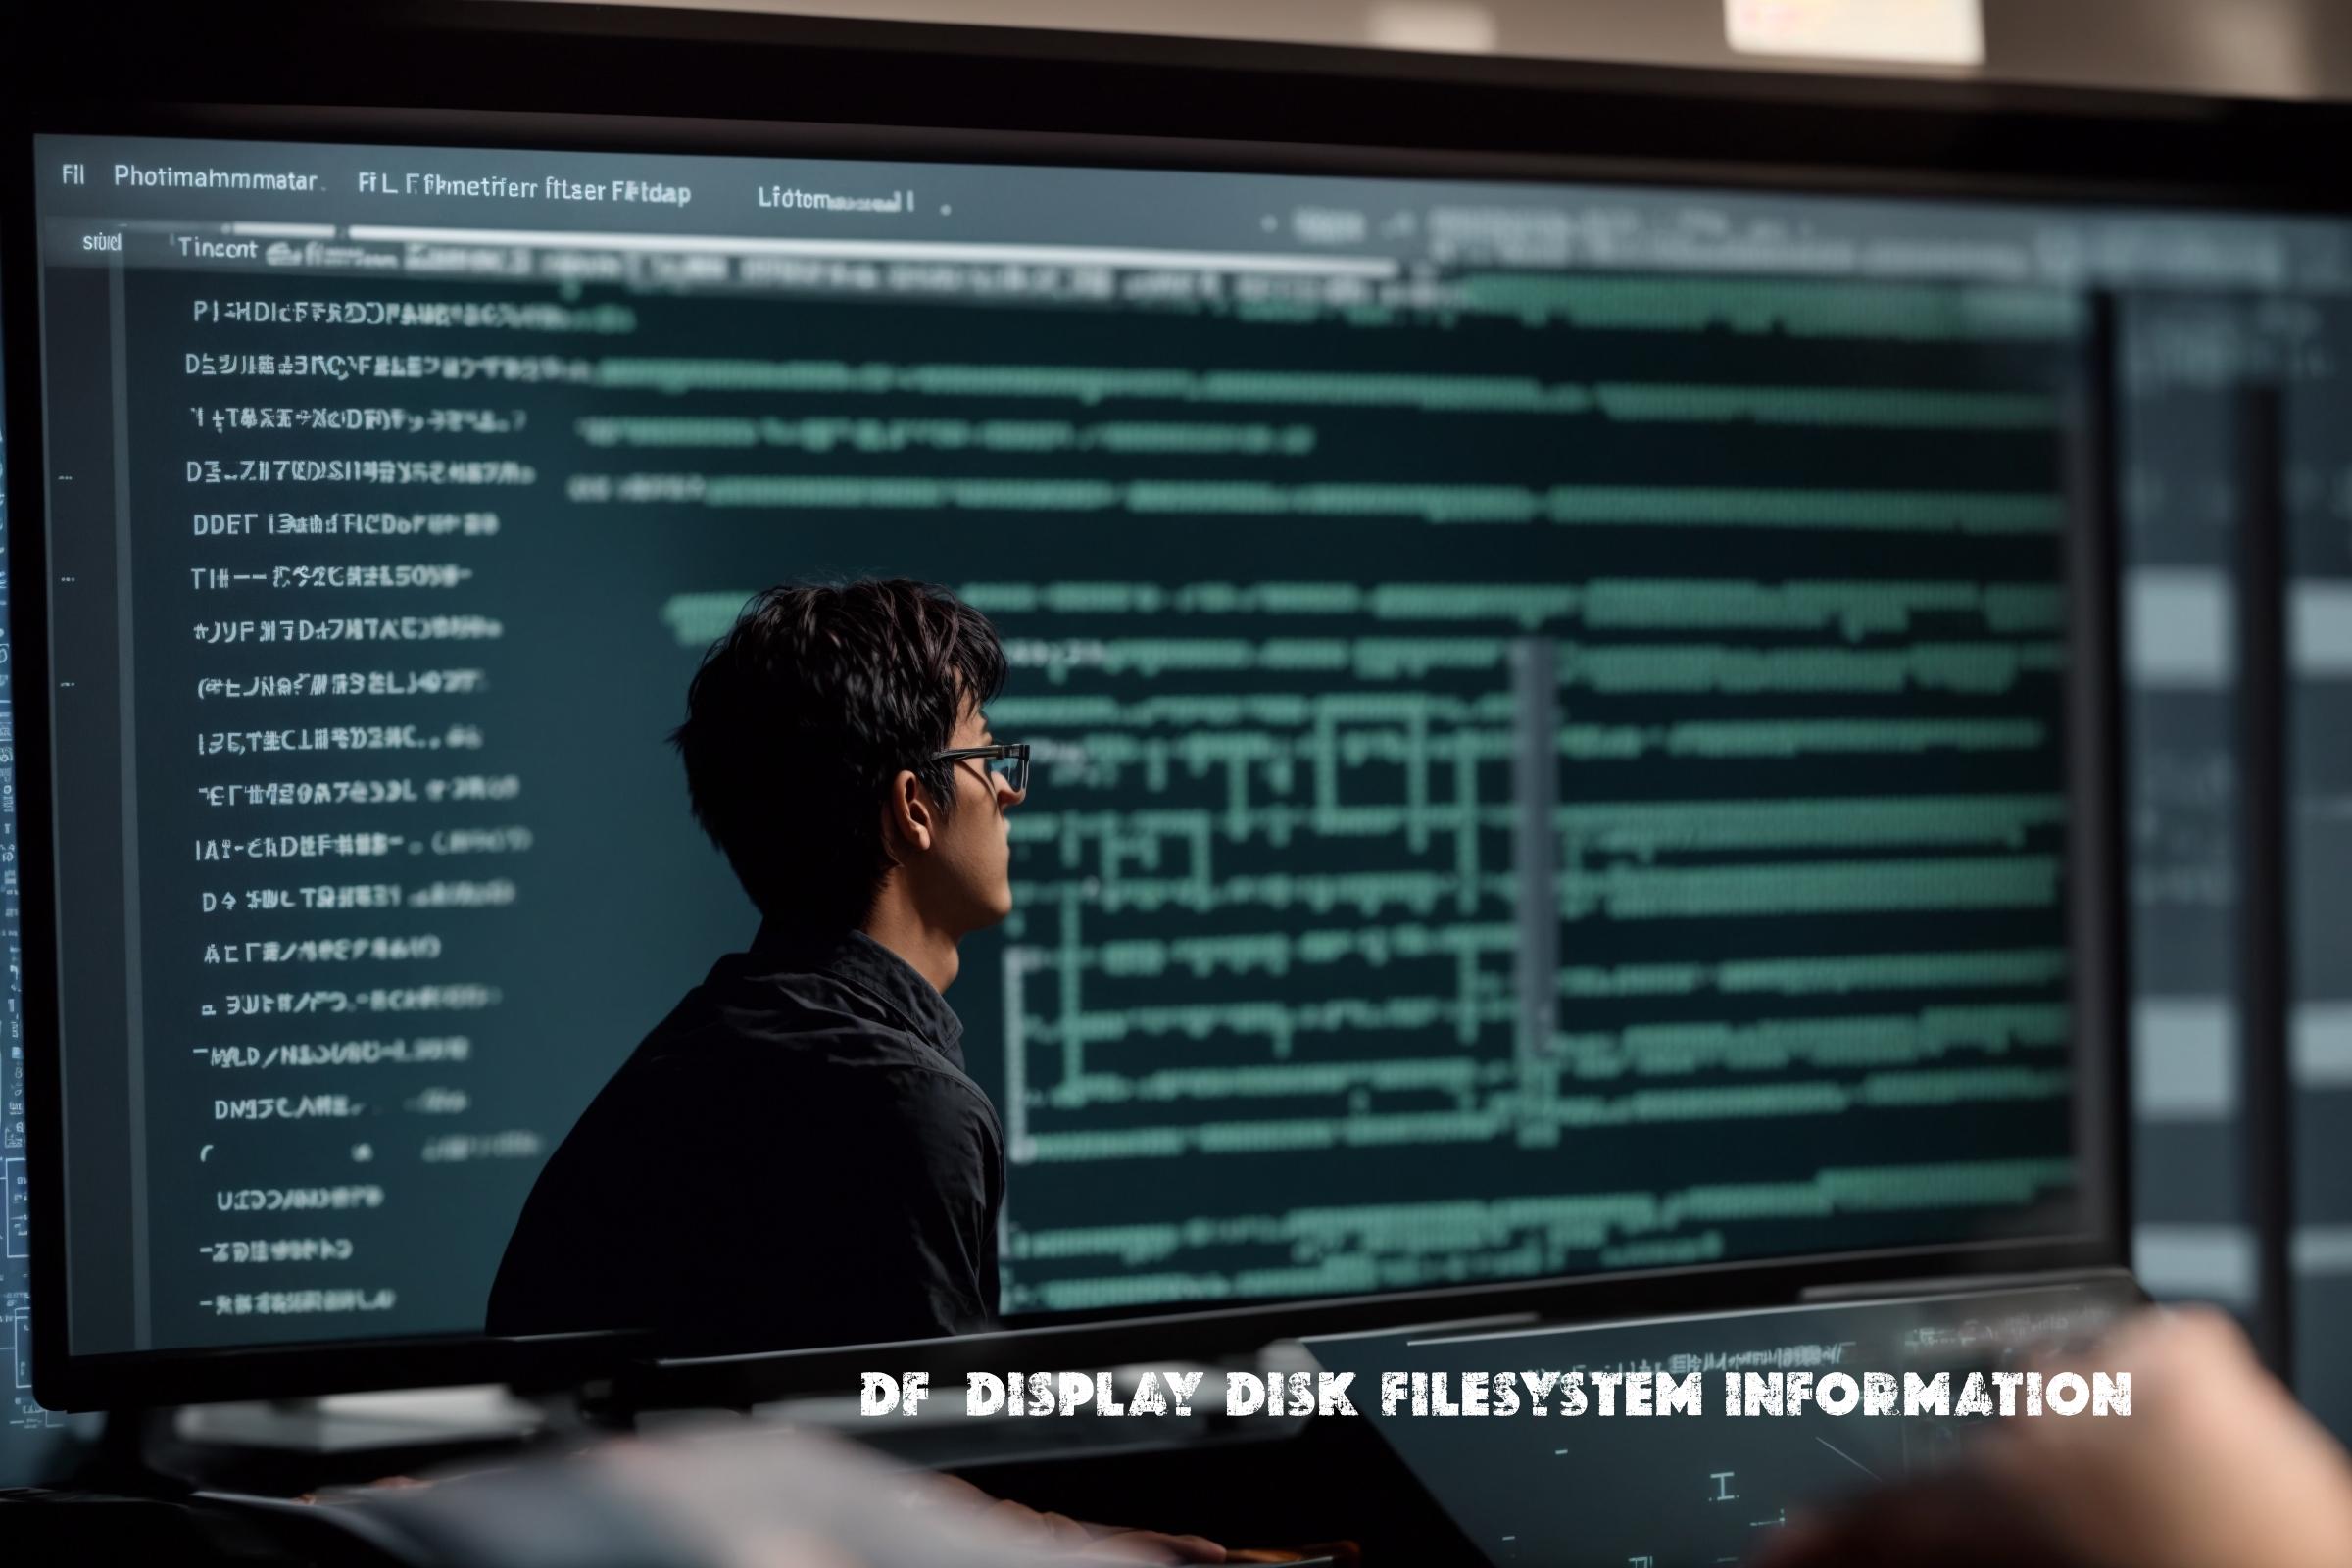 df – Display disk filesystem information: Usage, Scripts for free disk space monitoring